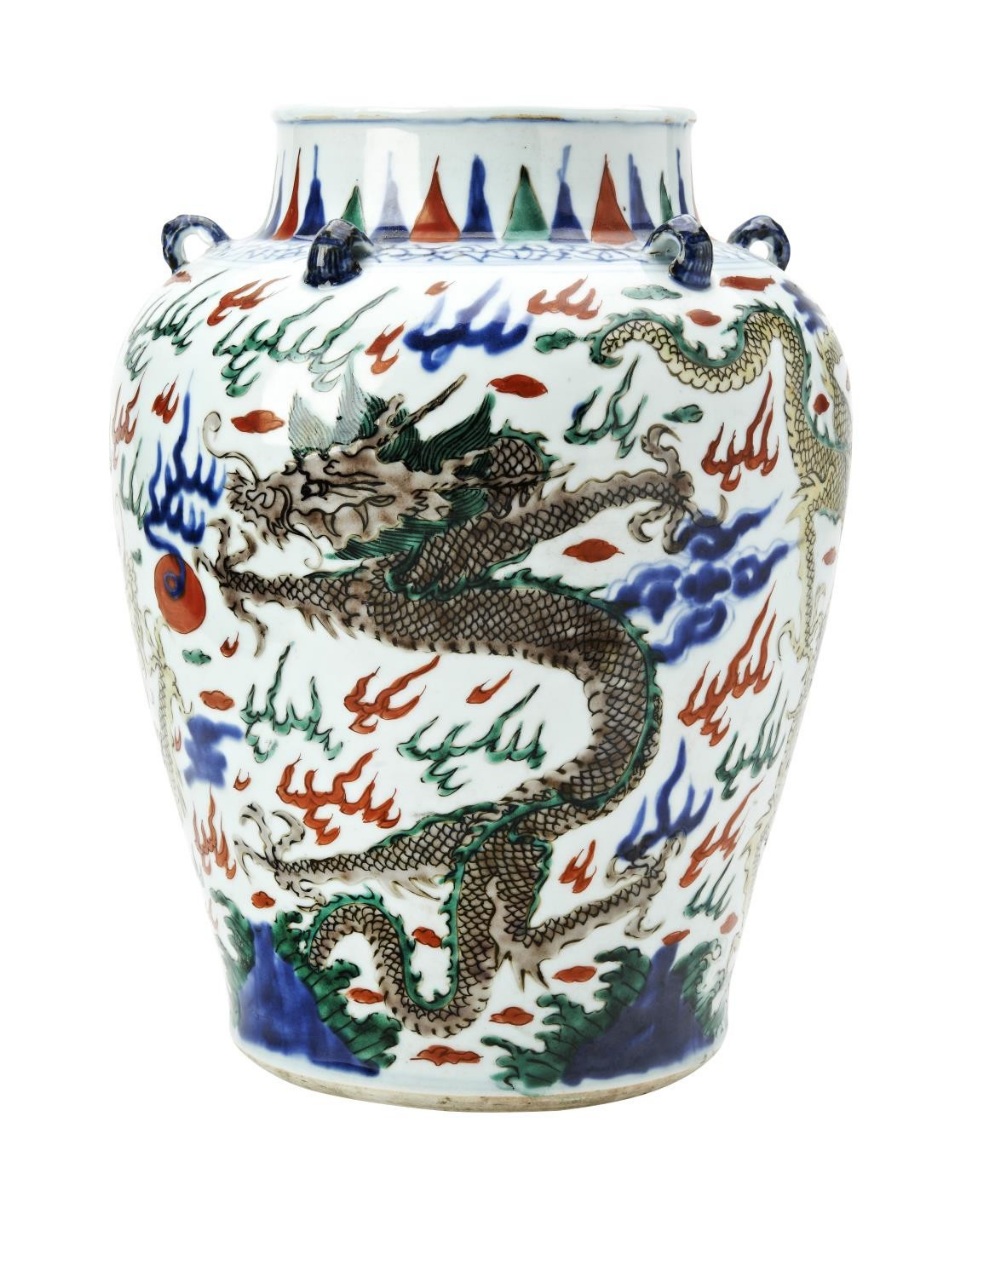 WUCAI 'DRAGON' JAR KANGXI PERIOD the baluster sides boldly painted in coloured enamels with